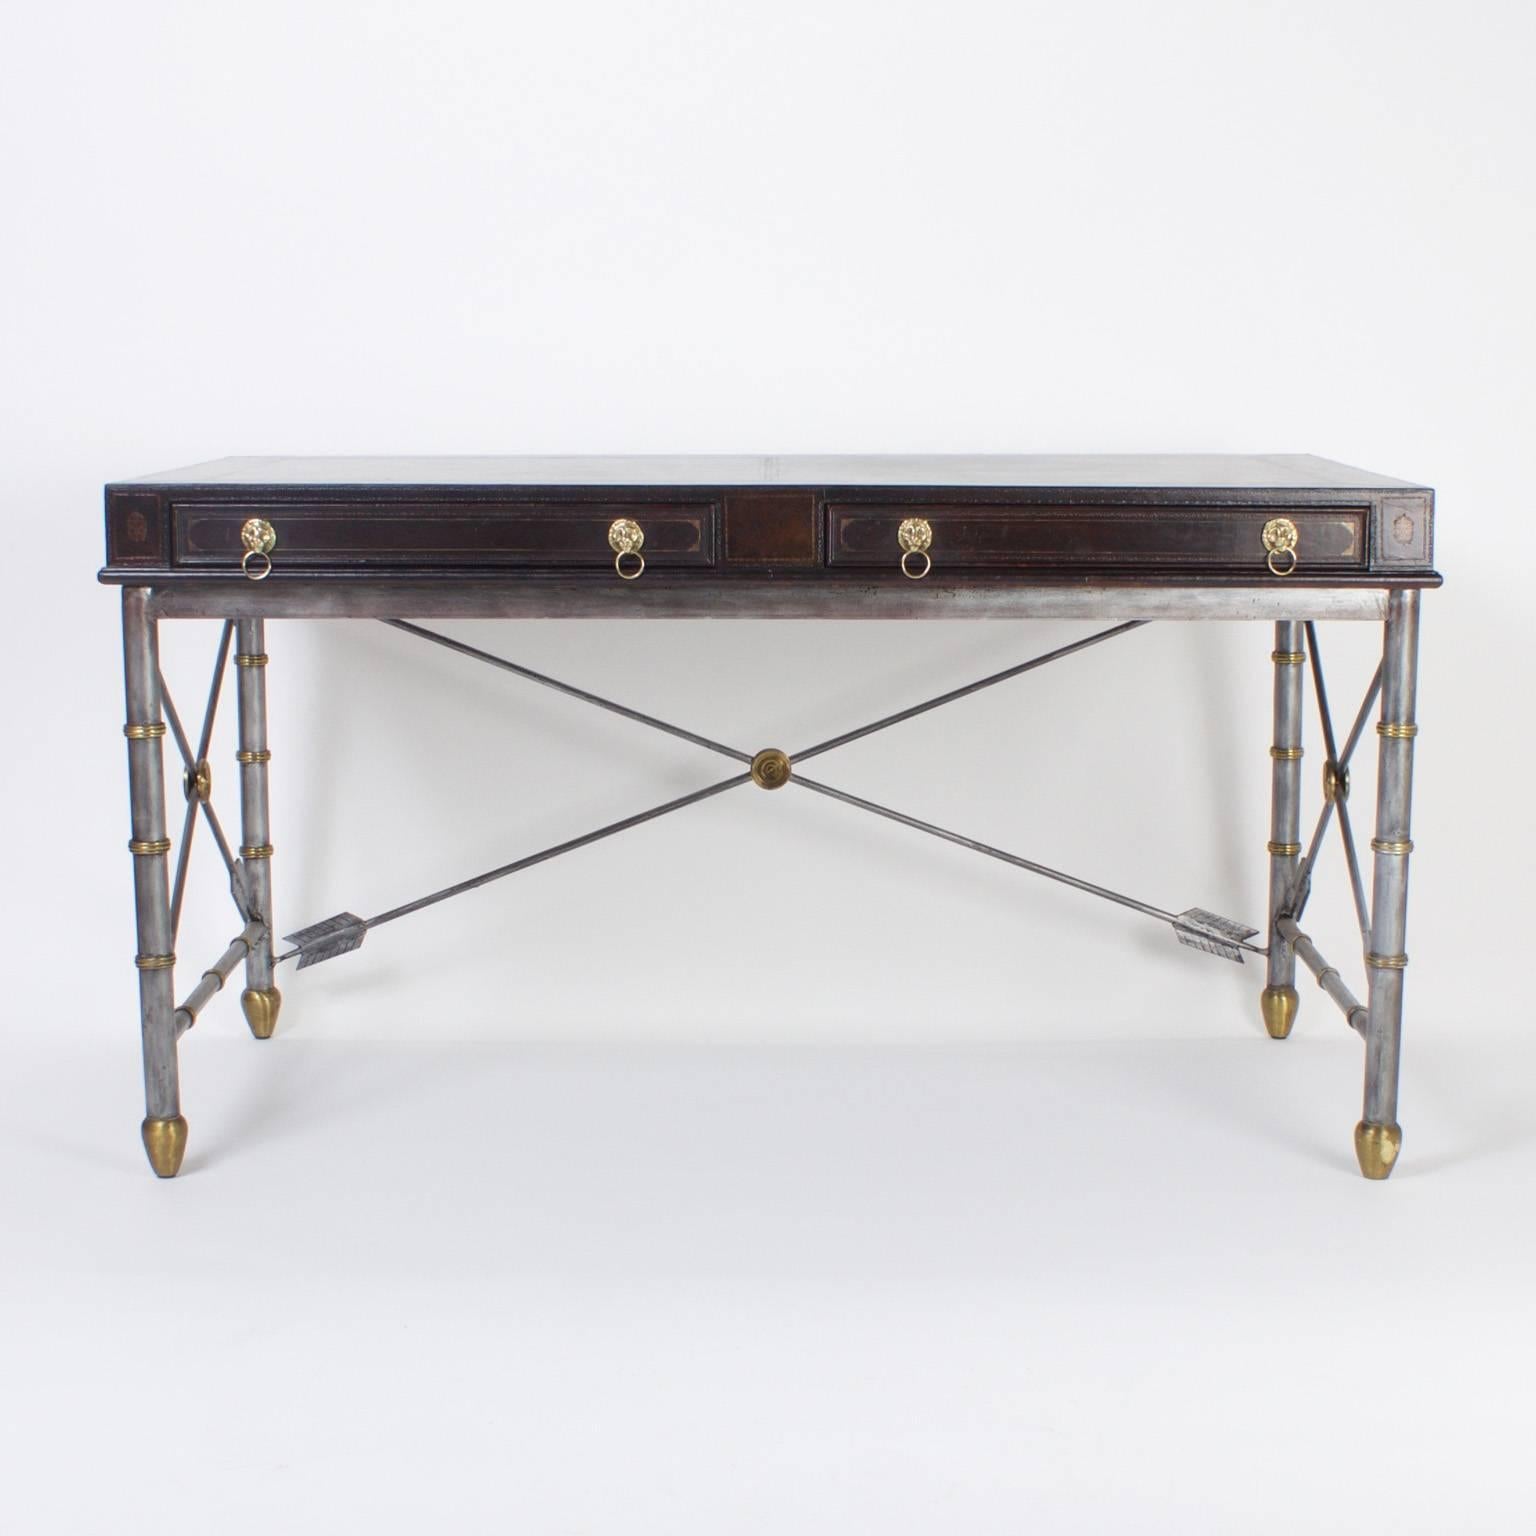 Here is a handsome Maitland Smith desk or writing table with an unusual combination of materials and influences. The top is tooled brown leather and has two drawers lined with book lining paper and lion head pulls. The base is a neoclassic design,